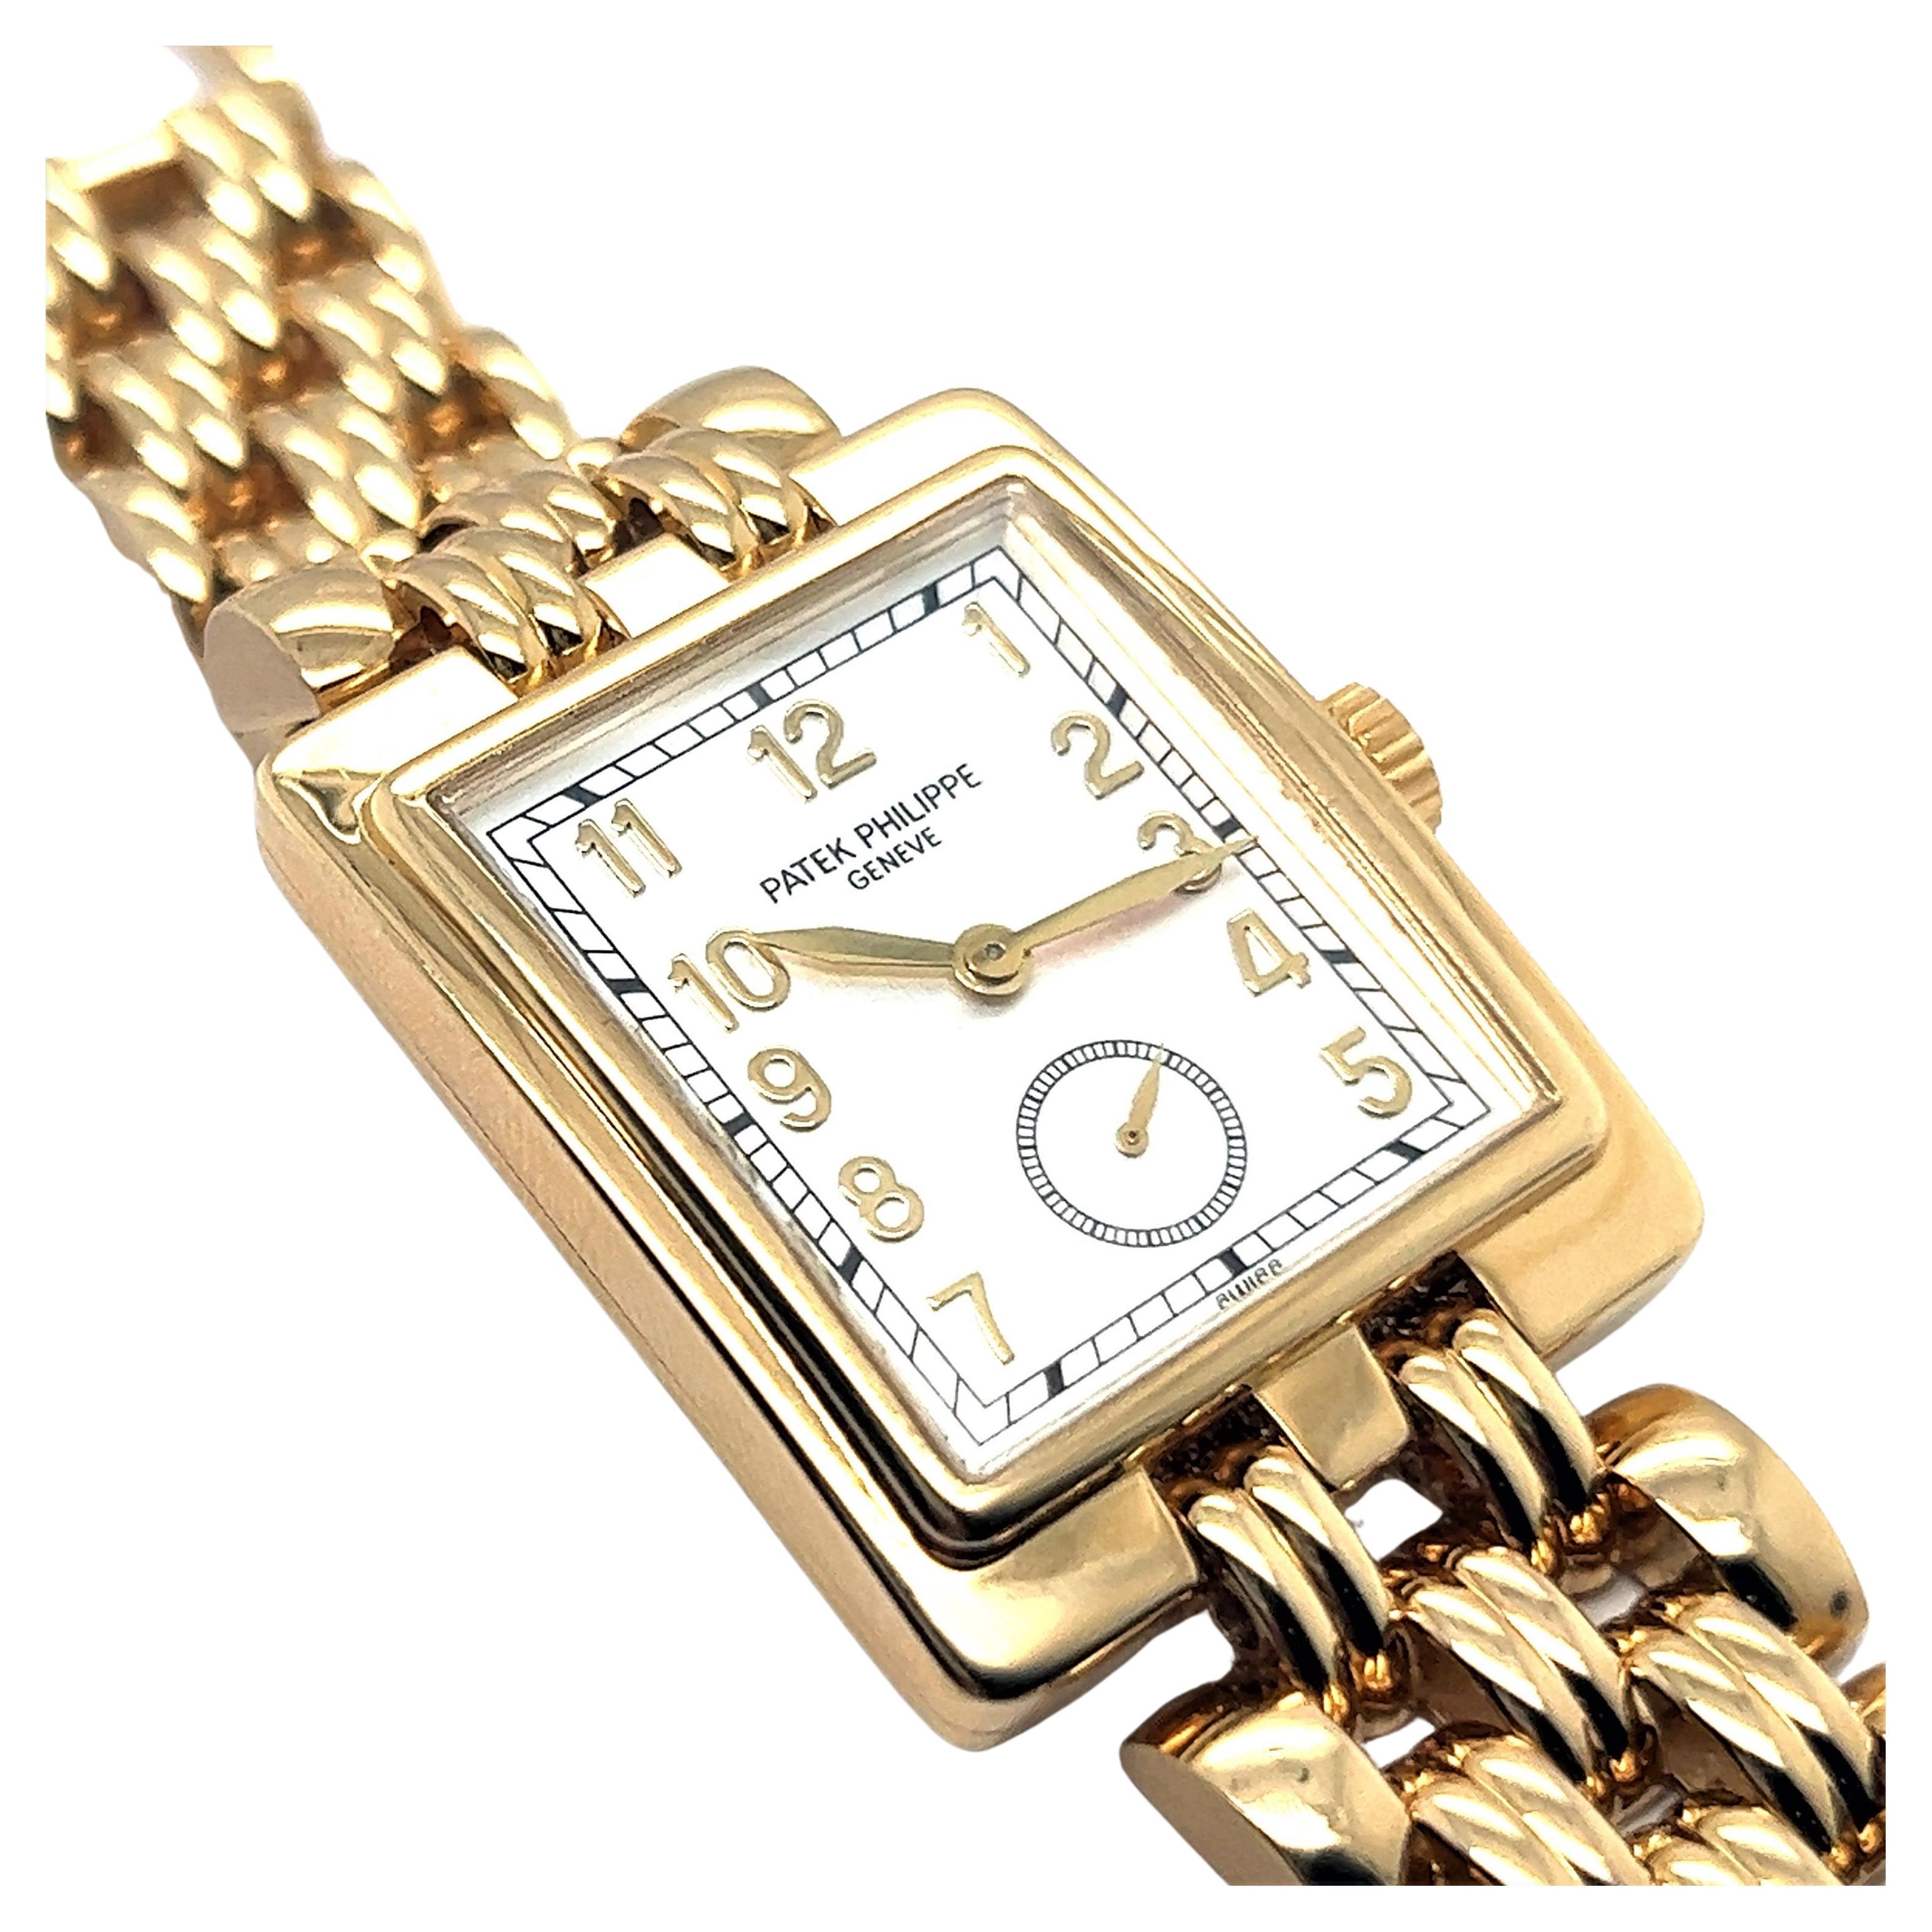 An elegant, one of a kind Patek Philippe watch from Gondolo collection. 

The name 